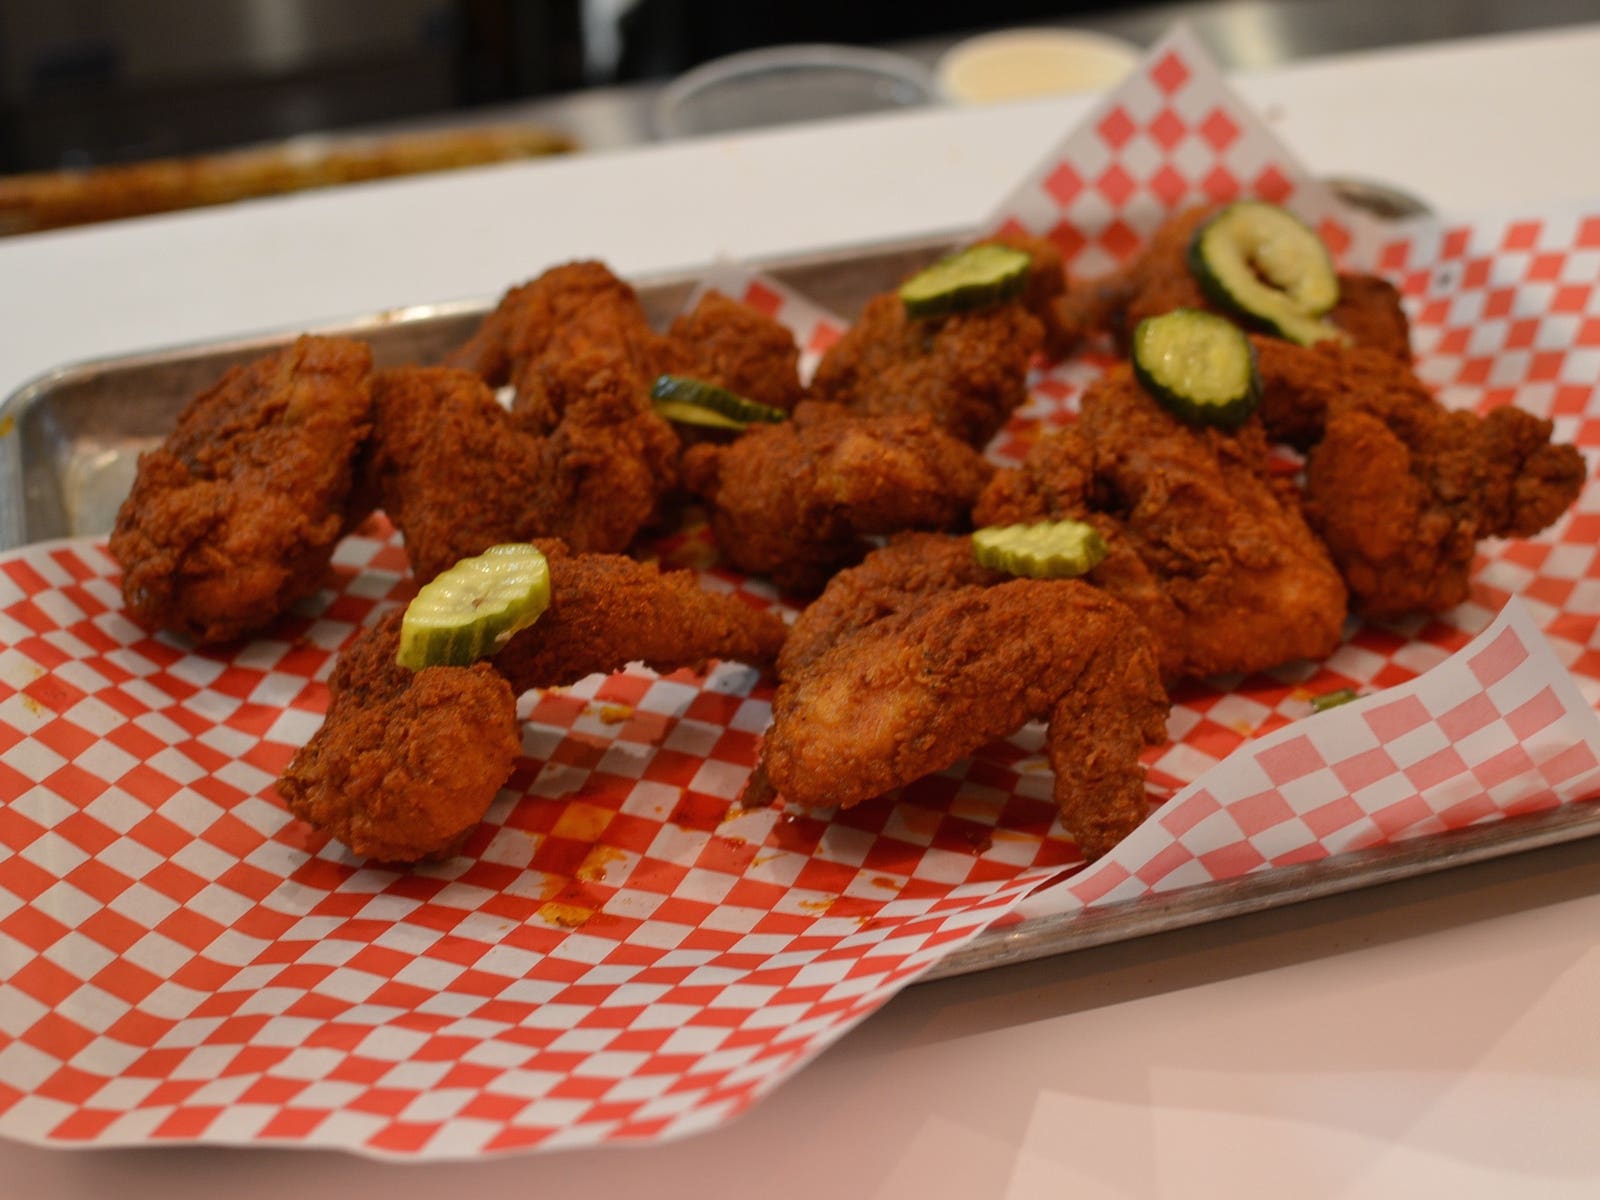 Batter's Box of fried chicken wings at Howlin' Ray's